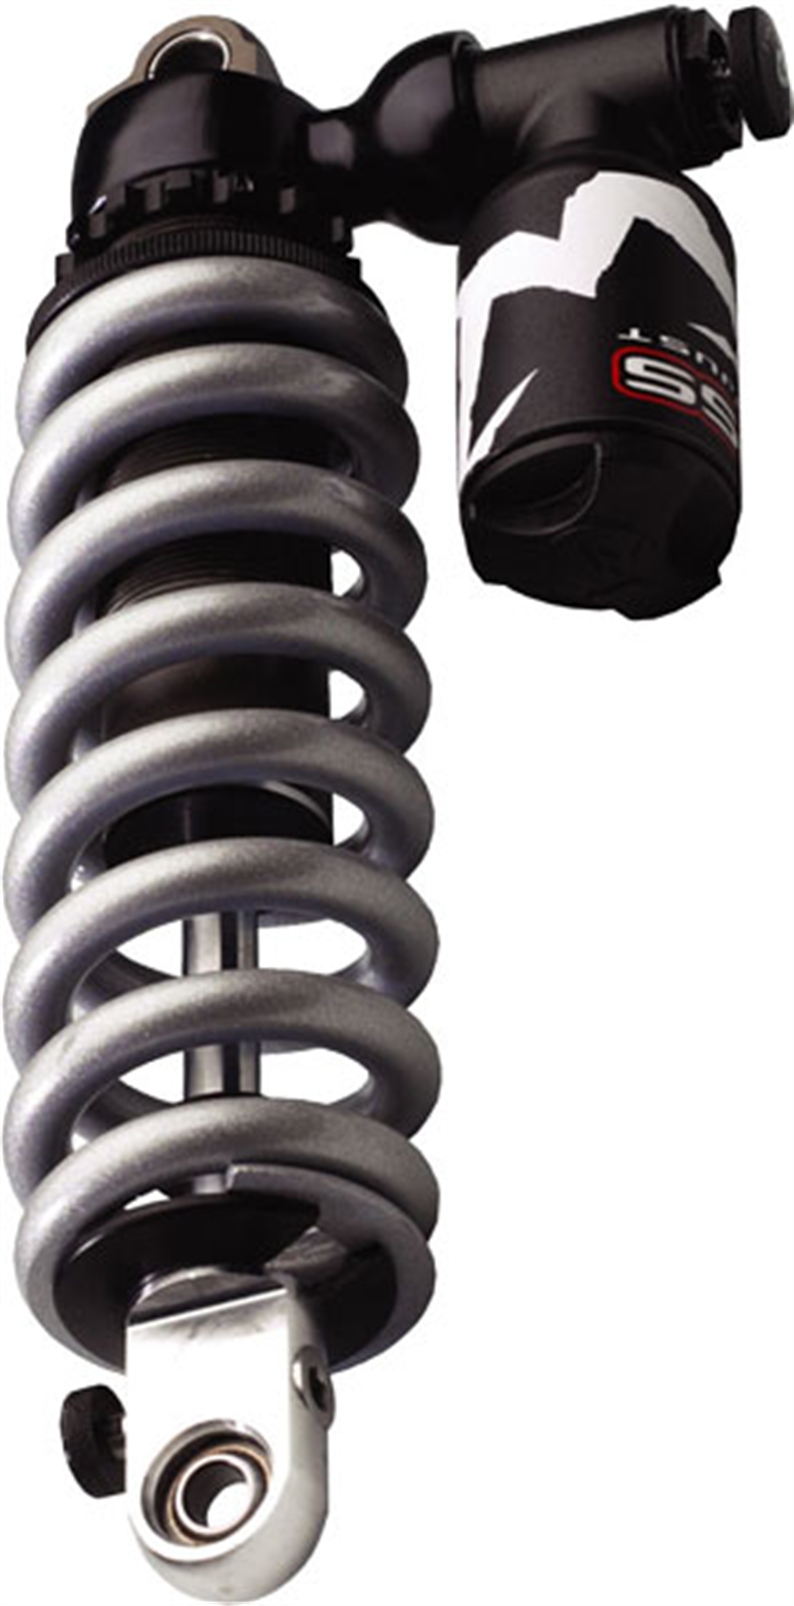 Cr-Si spring with rates from 80 to 120 N/mm, oil damping via piston and shims (Piggy Back System)